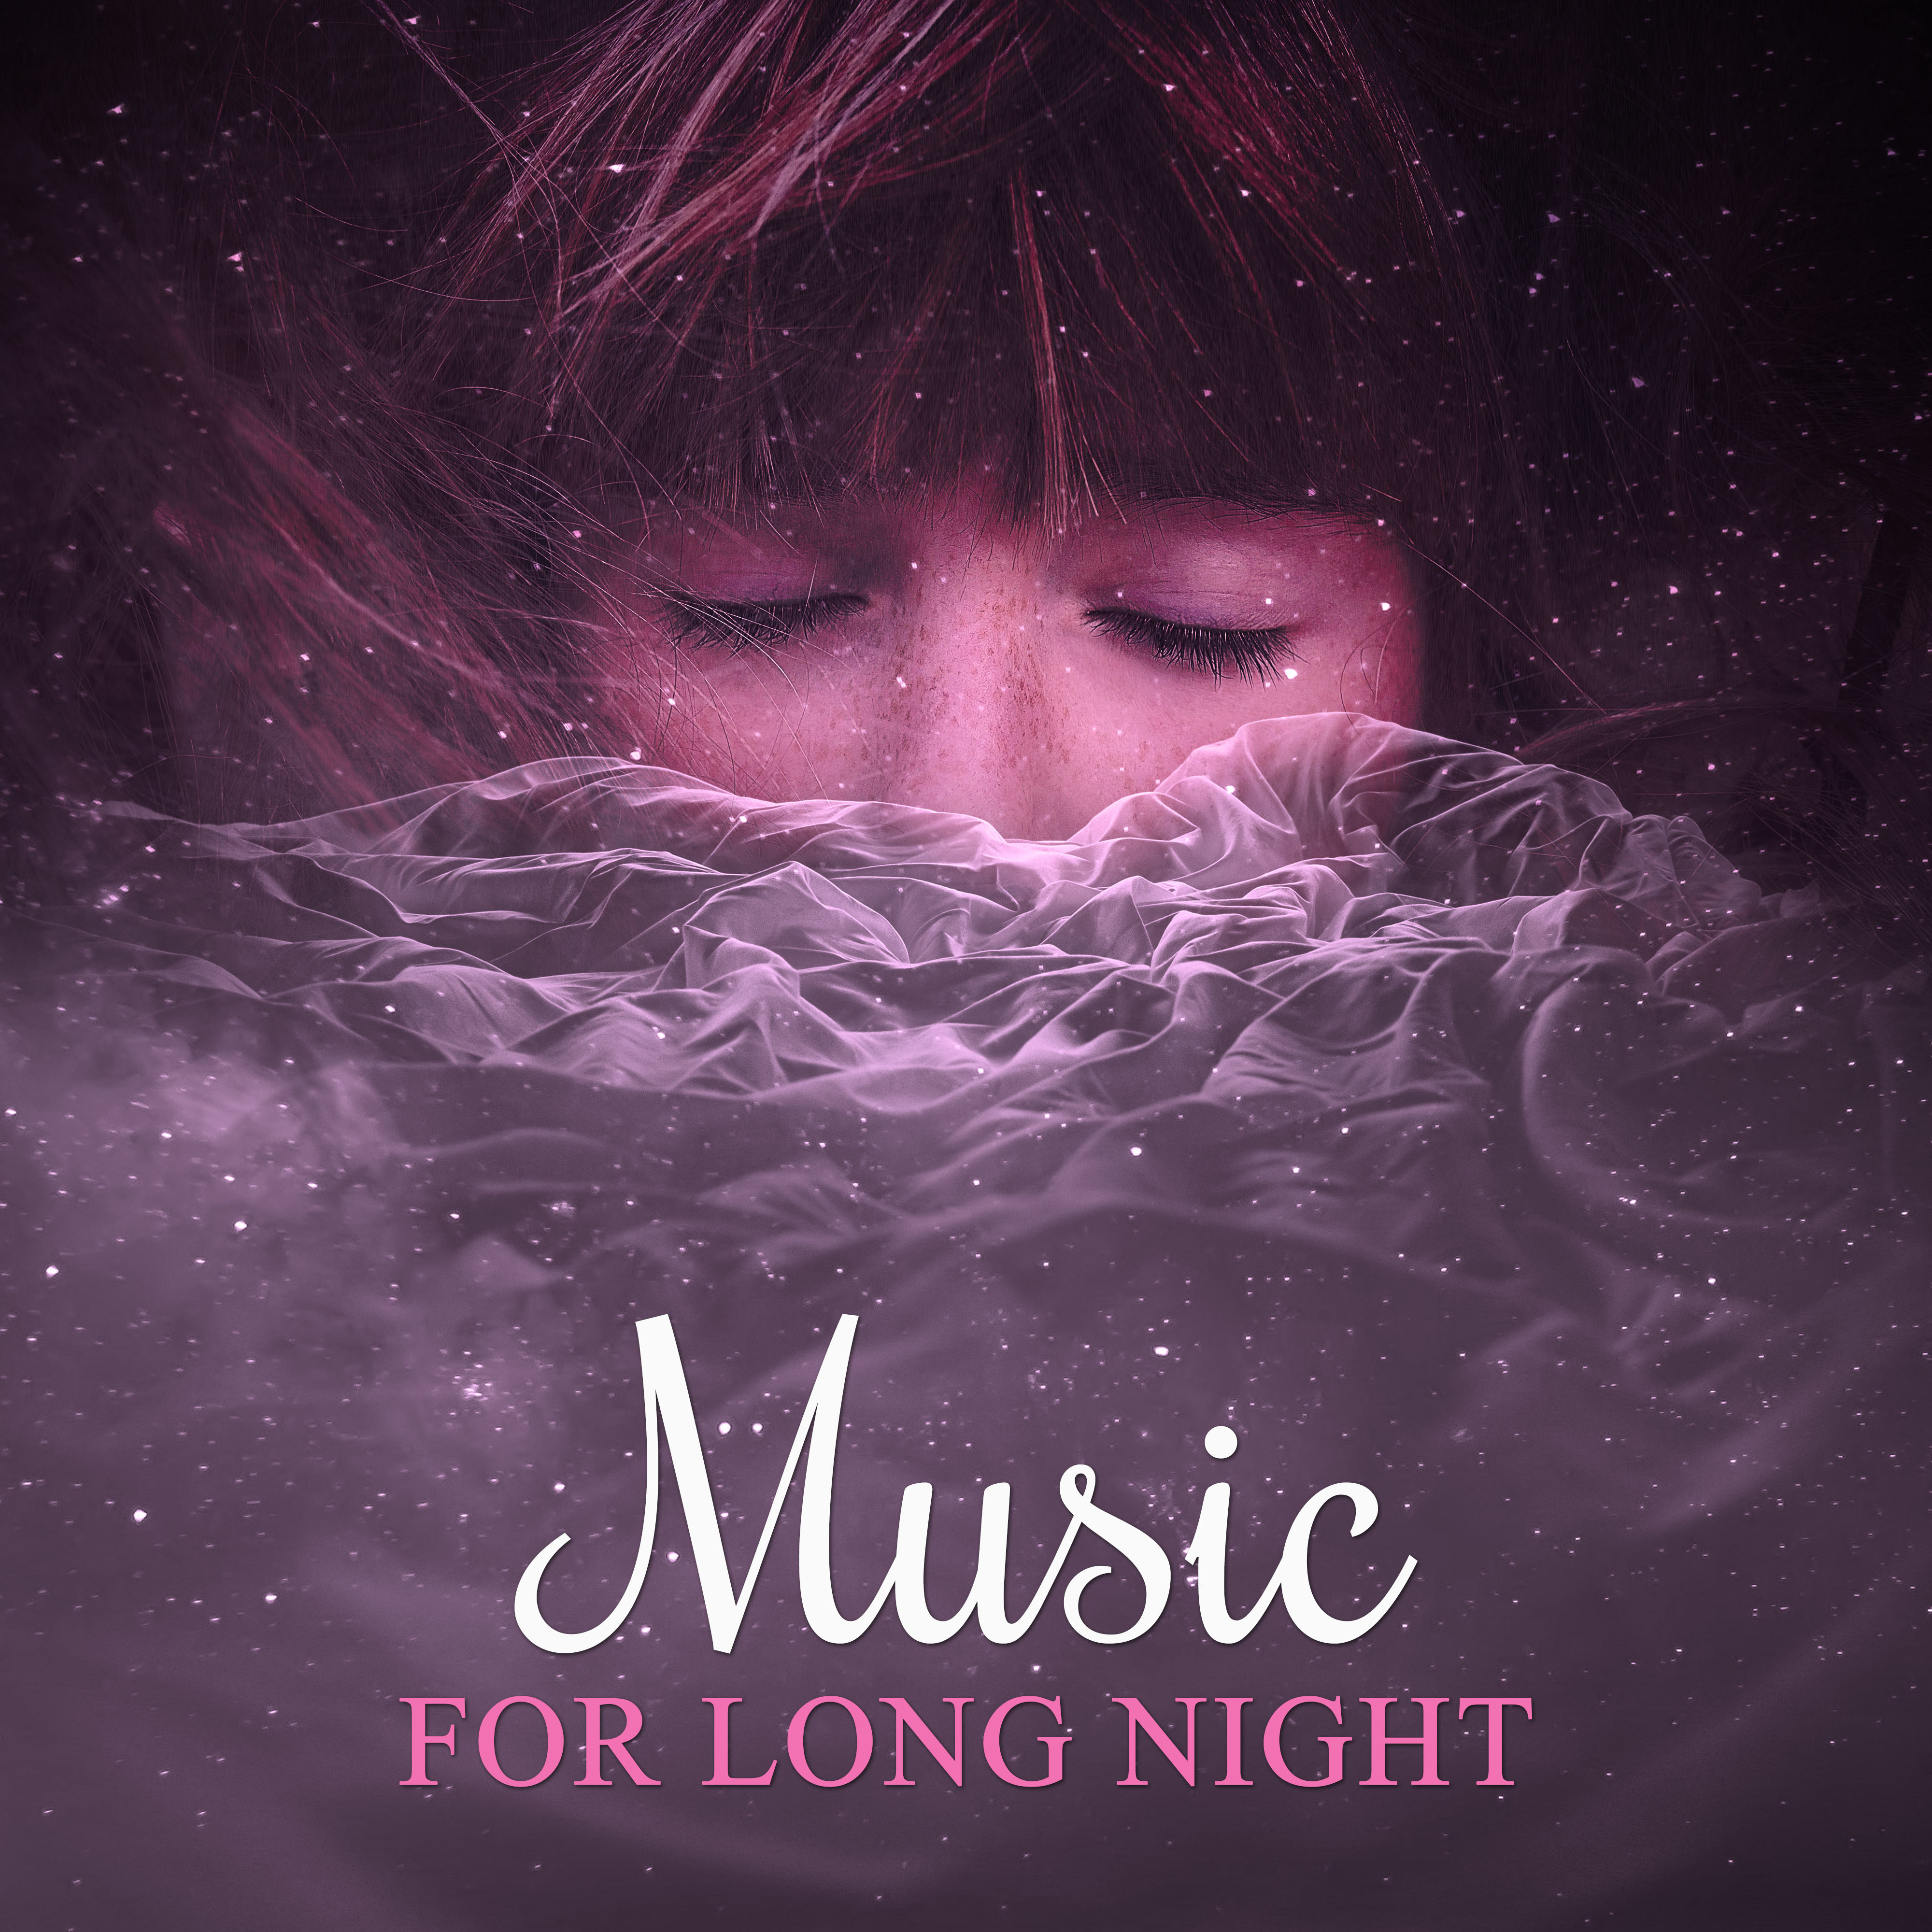 Music for Long Night – Calm Sounds of Nature for Cure Insomnia, Sleep Deeply, Relax Music, Sleepy Sleep, New Age Music